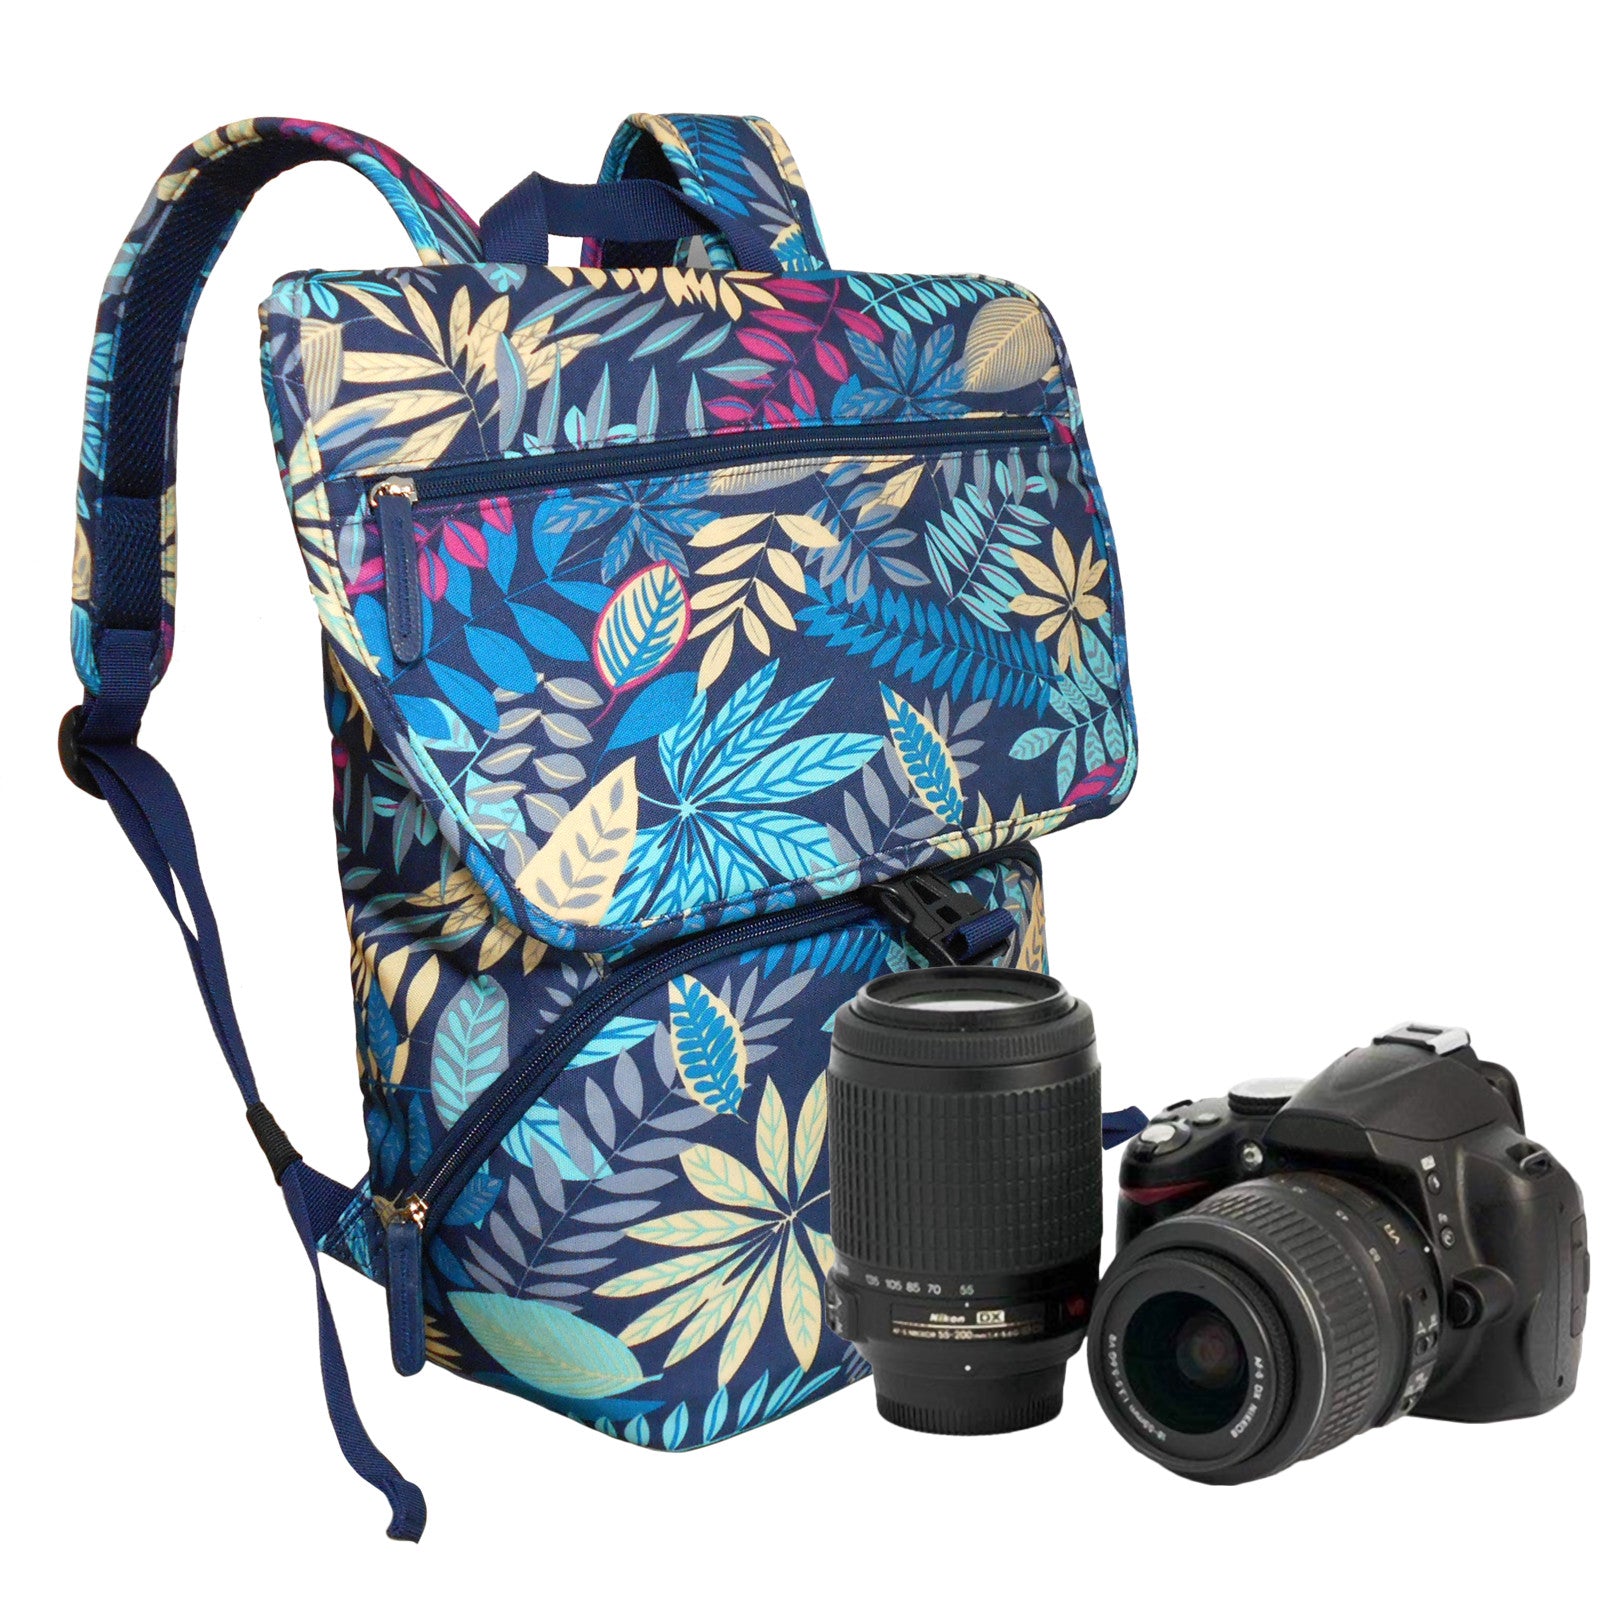 Discover more than 86 extra large dslr camera bags latest - in.duhocakina